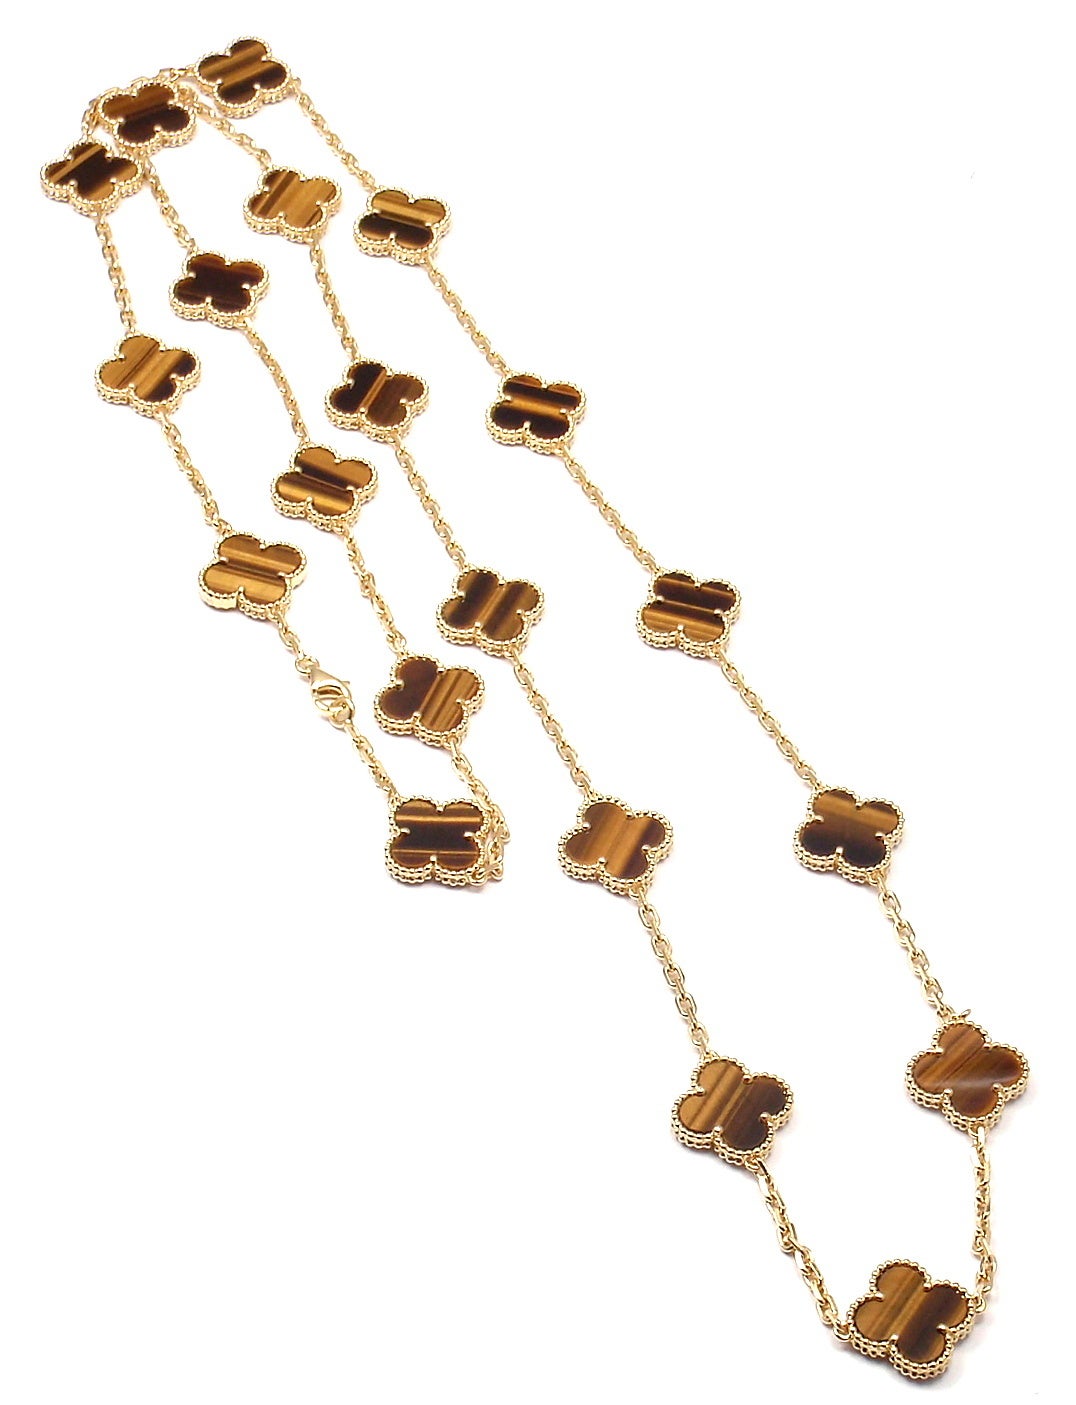 18k Yellow Gold Alhambra Twenty-Motif Tiger’s Eye Necklace by 
Van Cleef & Arpels. 
With 20 motifs of Tiger’s Eye Alhambra stones, 15mm each.

Details: 
Length: 33